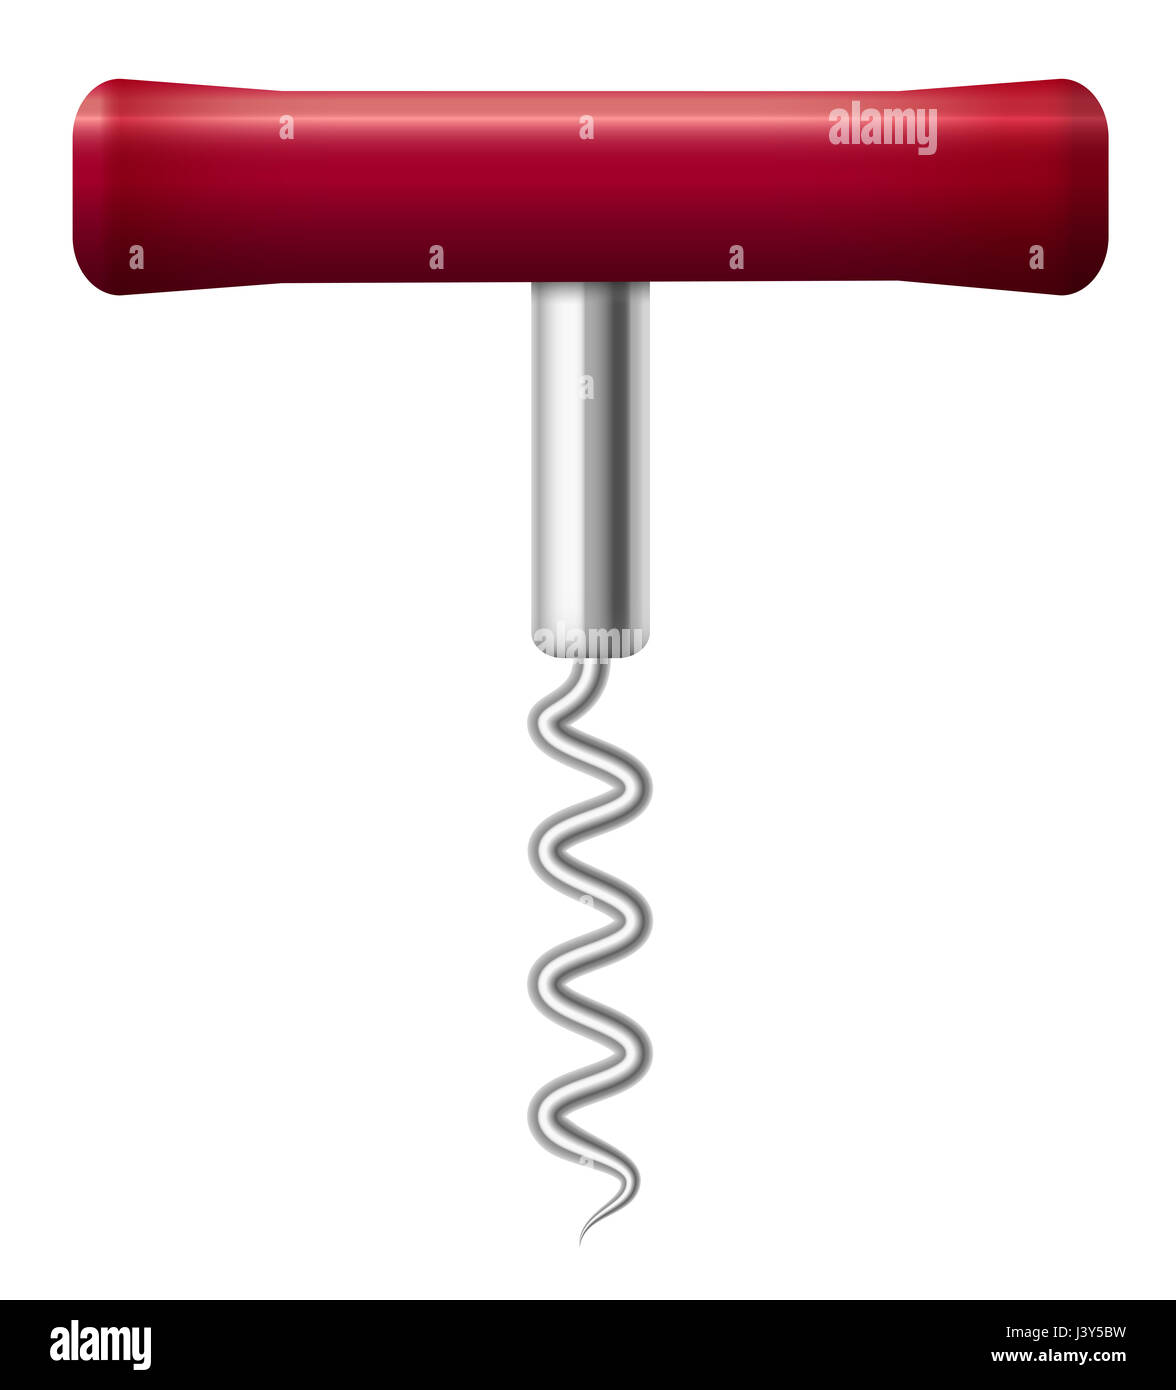 Corkscrew with wine red handle - traditional version of basic winery tool - 3d illustration on white background. Stock Photo